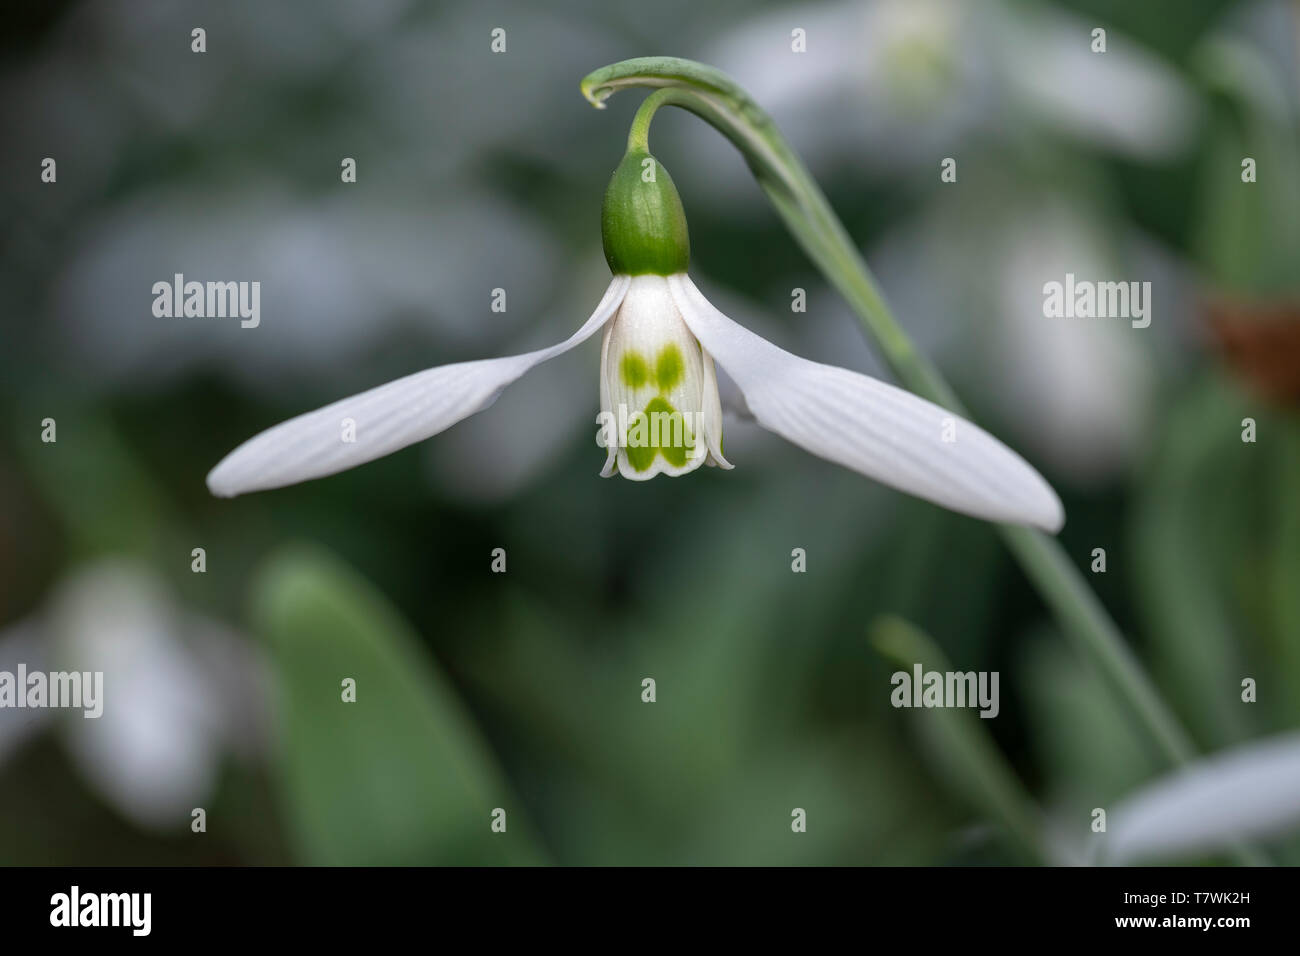 White snowdrop flower blooming in the edge and bright areas of the bushes Stock Photo